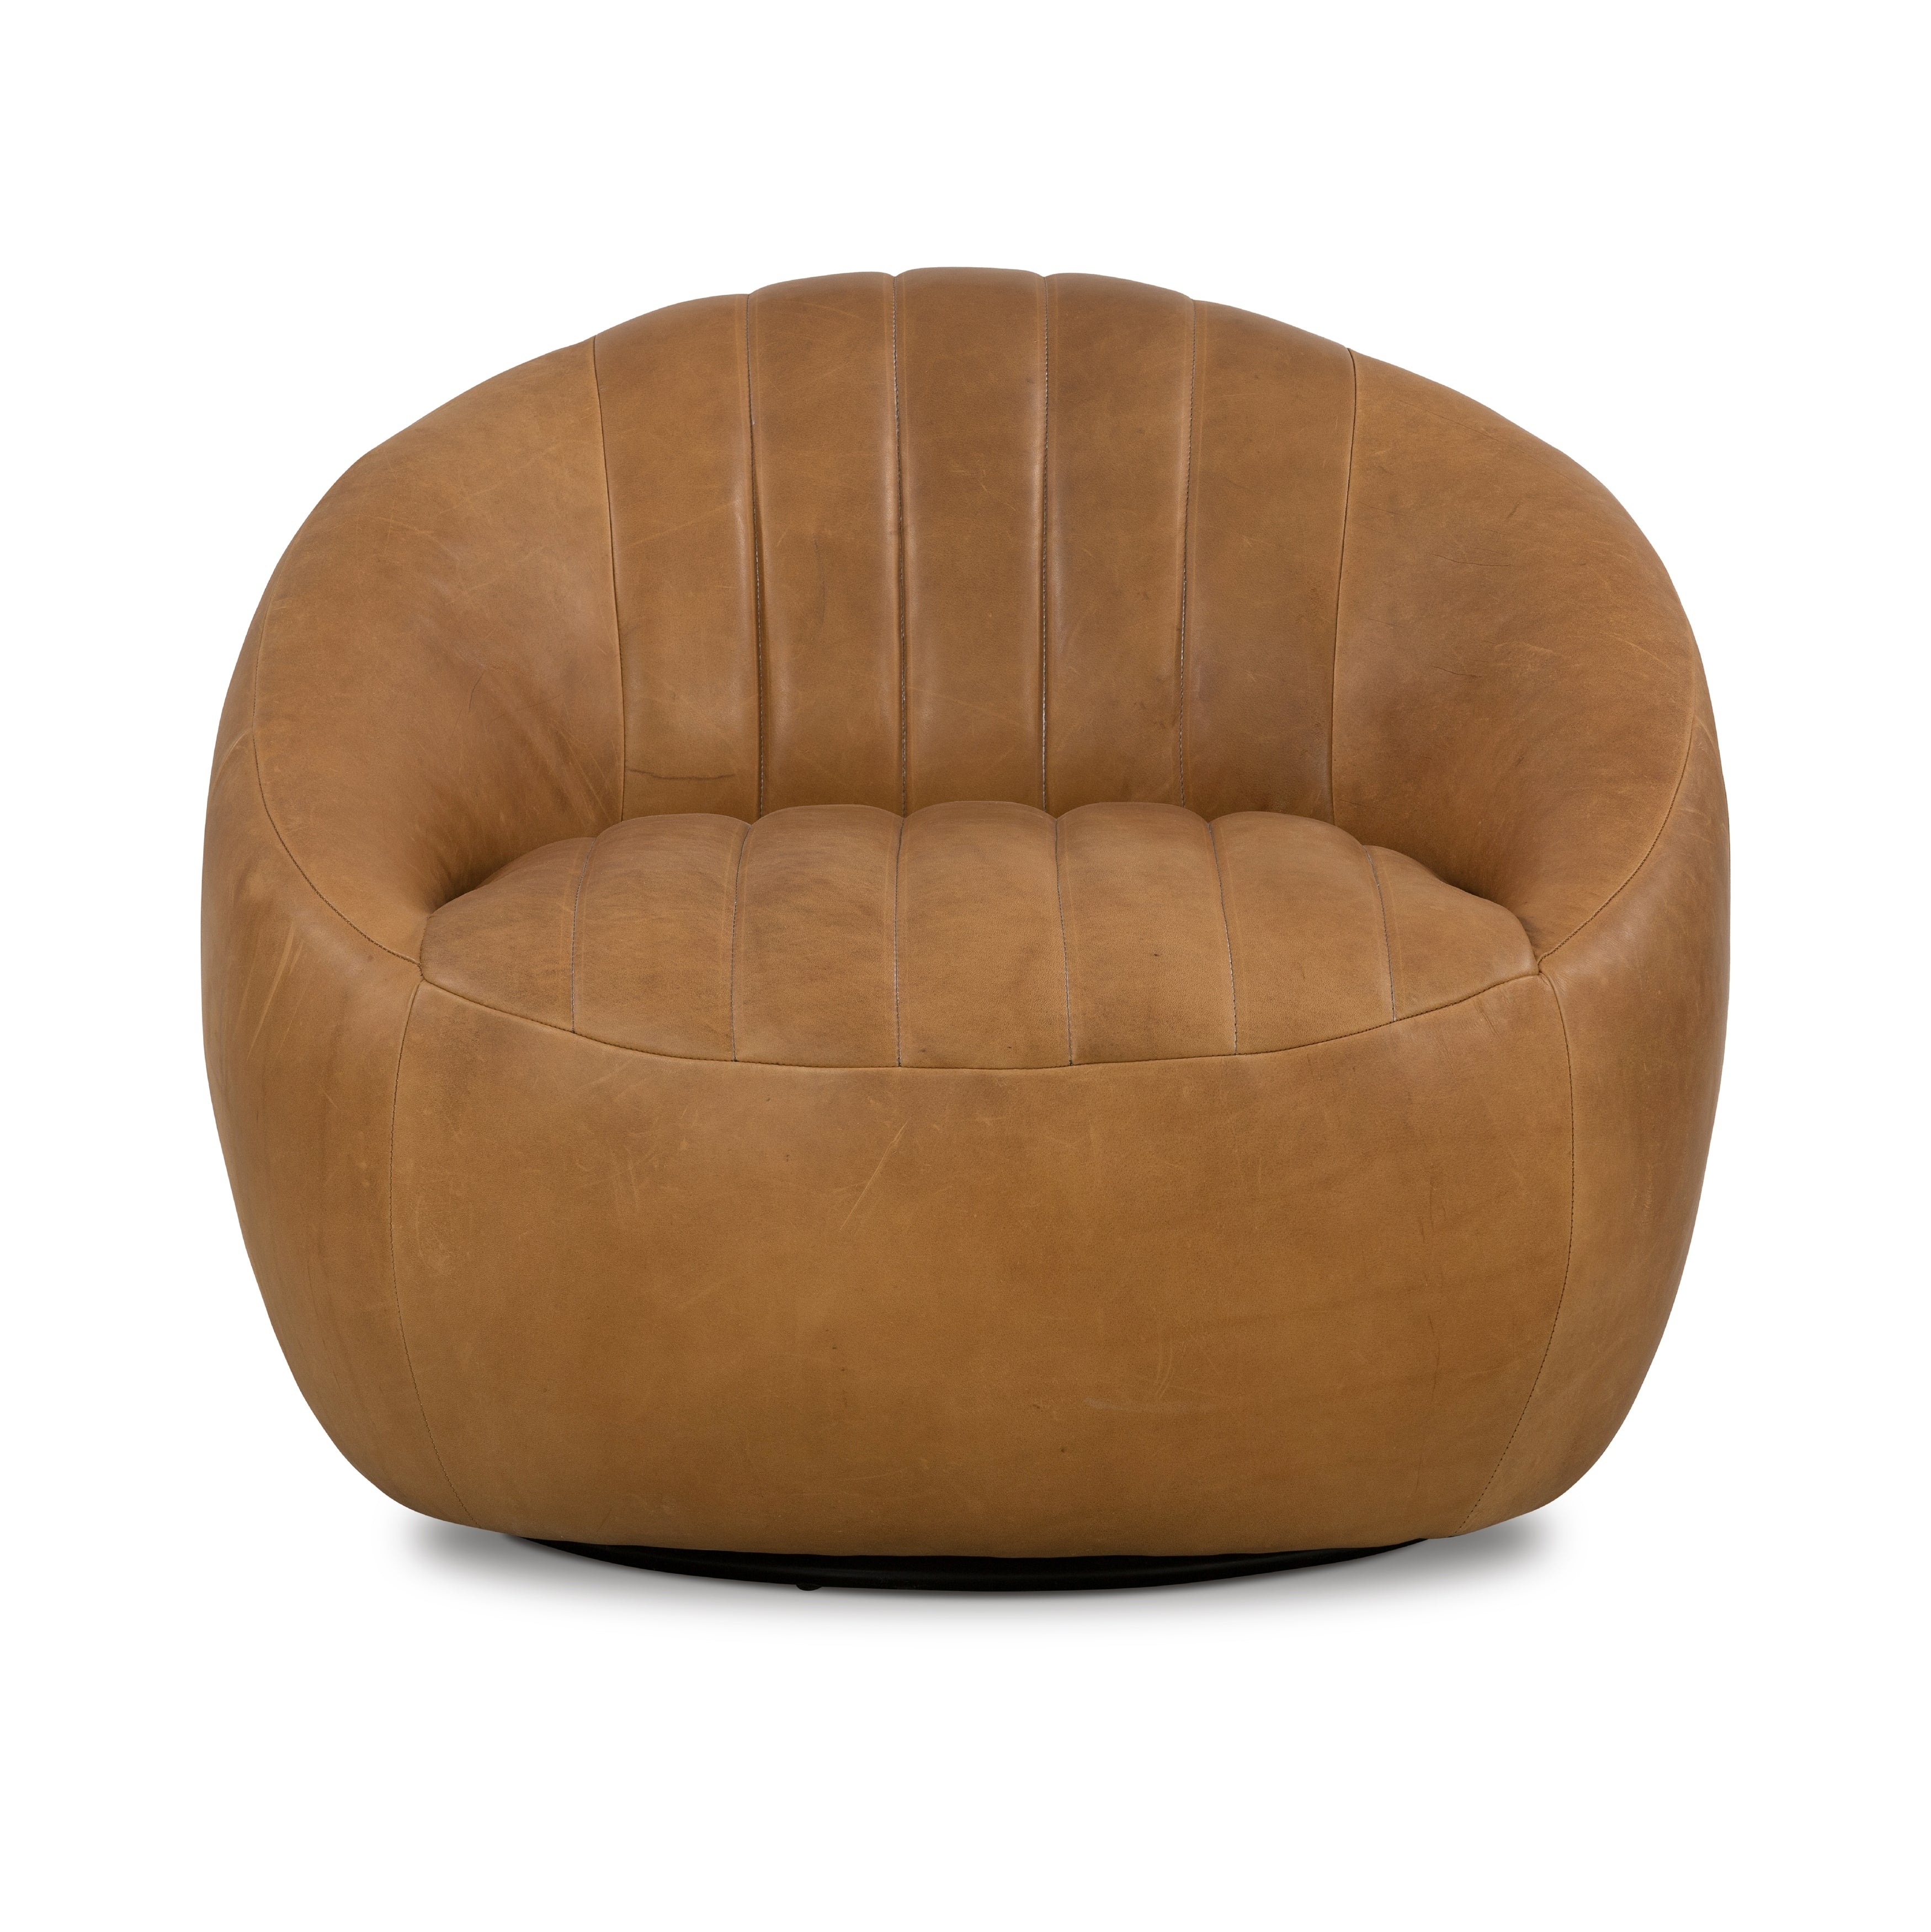 The Audie Heirloom Sienna Swivel Chair is made of heirloom leather that is salvaged and processed from upcycled hides featuring an abundance of natural markings, scars, and color variations. The result? Supple, buttery-soft hides with an unmatched depth of color and authentic lived-in look. Amethyst Home provides interior design services, furniture, rugs, and lighting in the Dallas metro area.